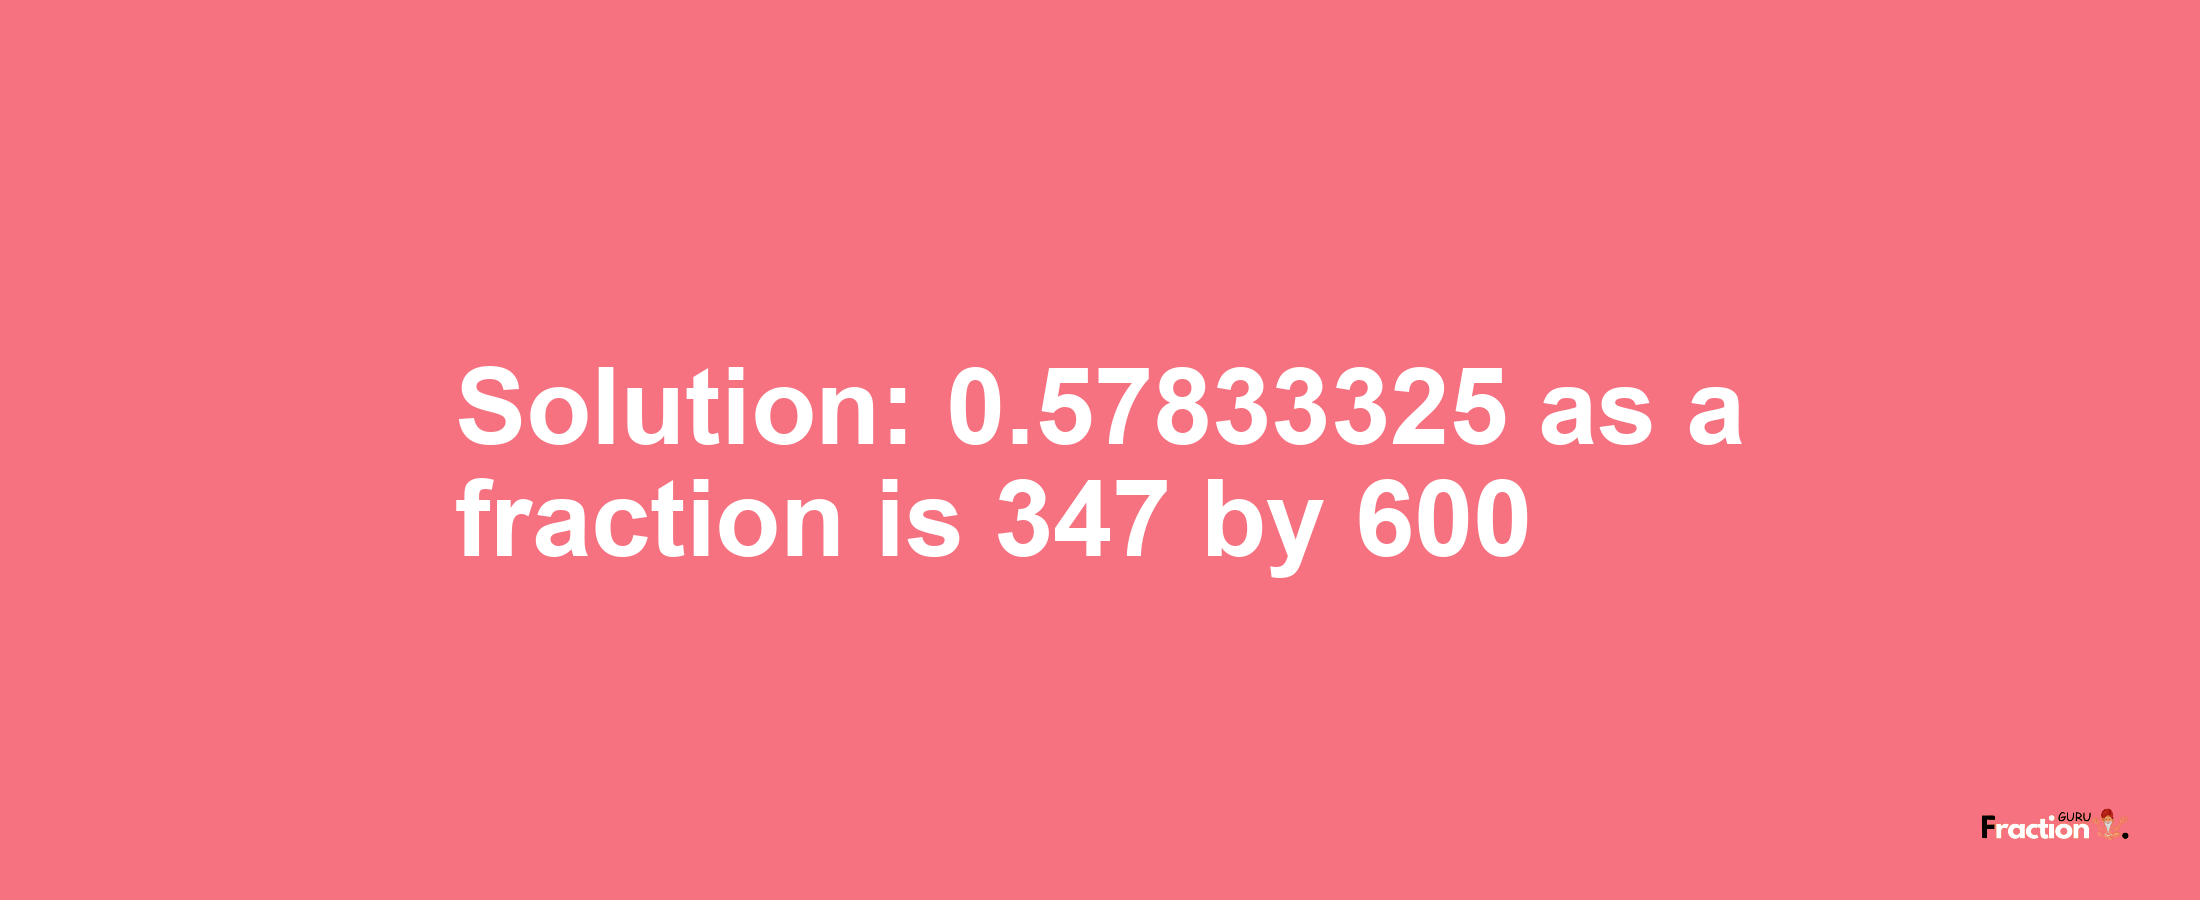 Solution:0.57833325 as a fraction is 347/600